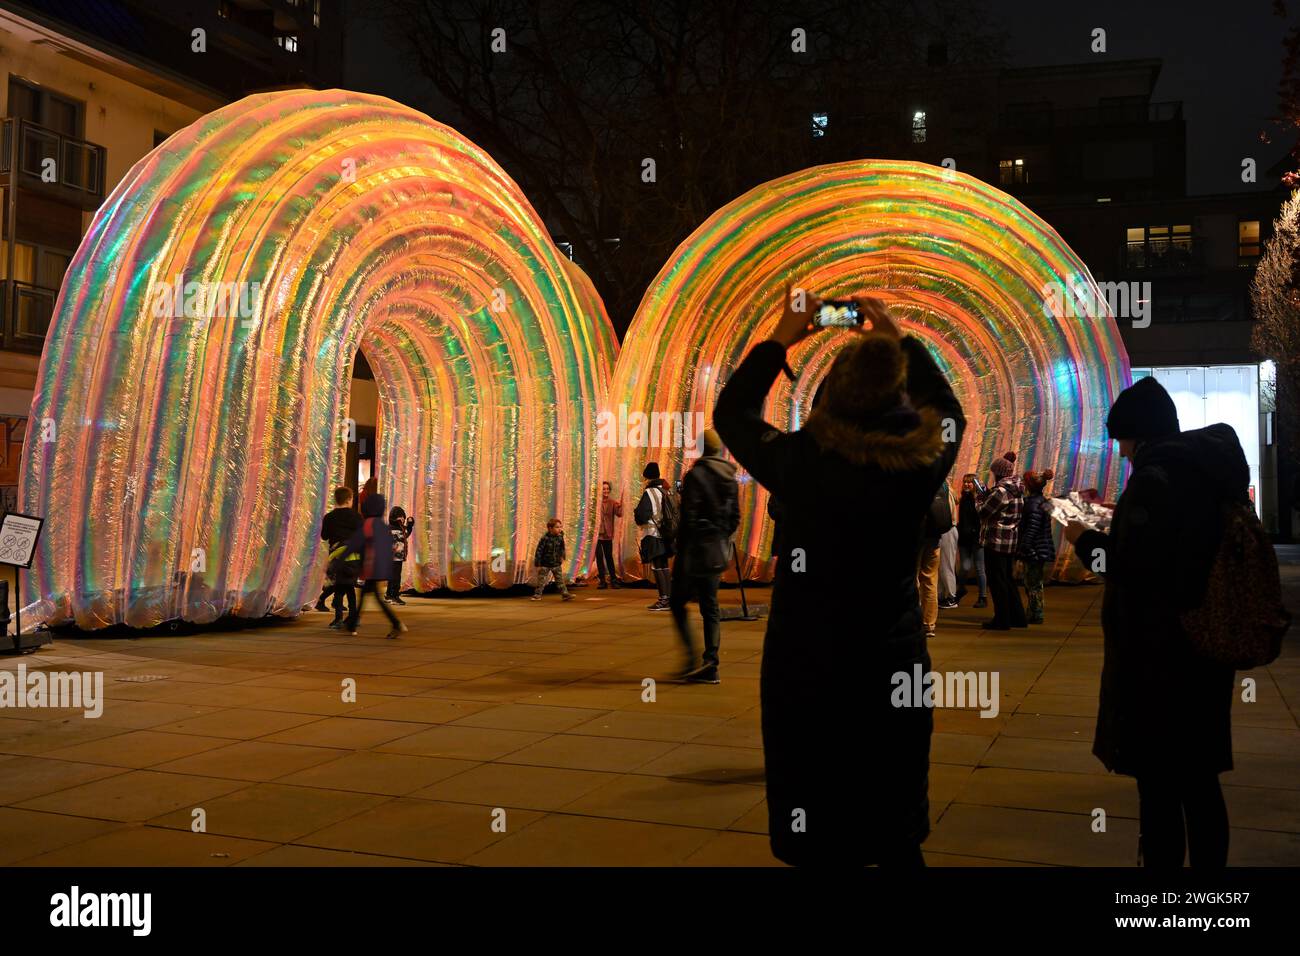 Series of giant inflatable arches at night, “Elysian” by Atelier Sisu part of Bristol Light Festival 2-11 Feb 2024 with visitors taking photographs Stock Photo